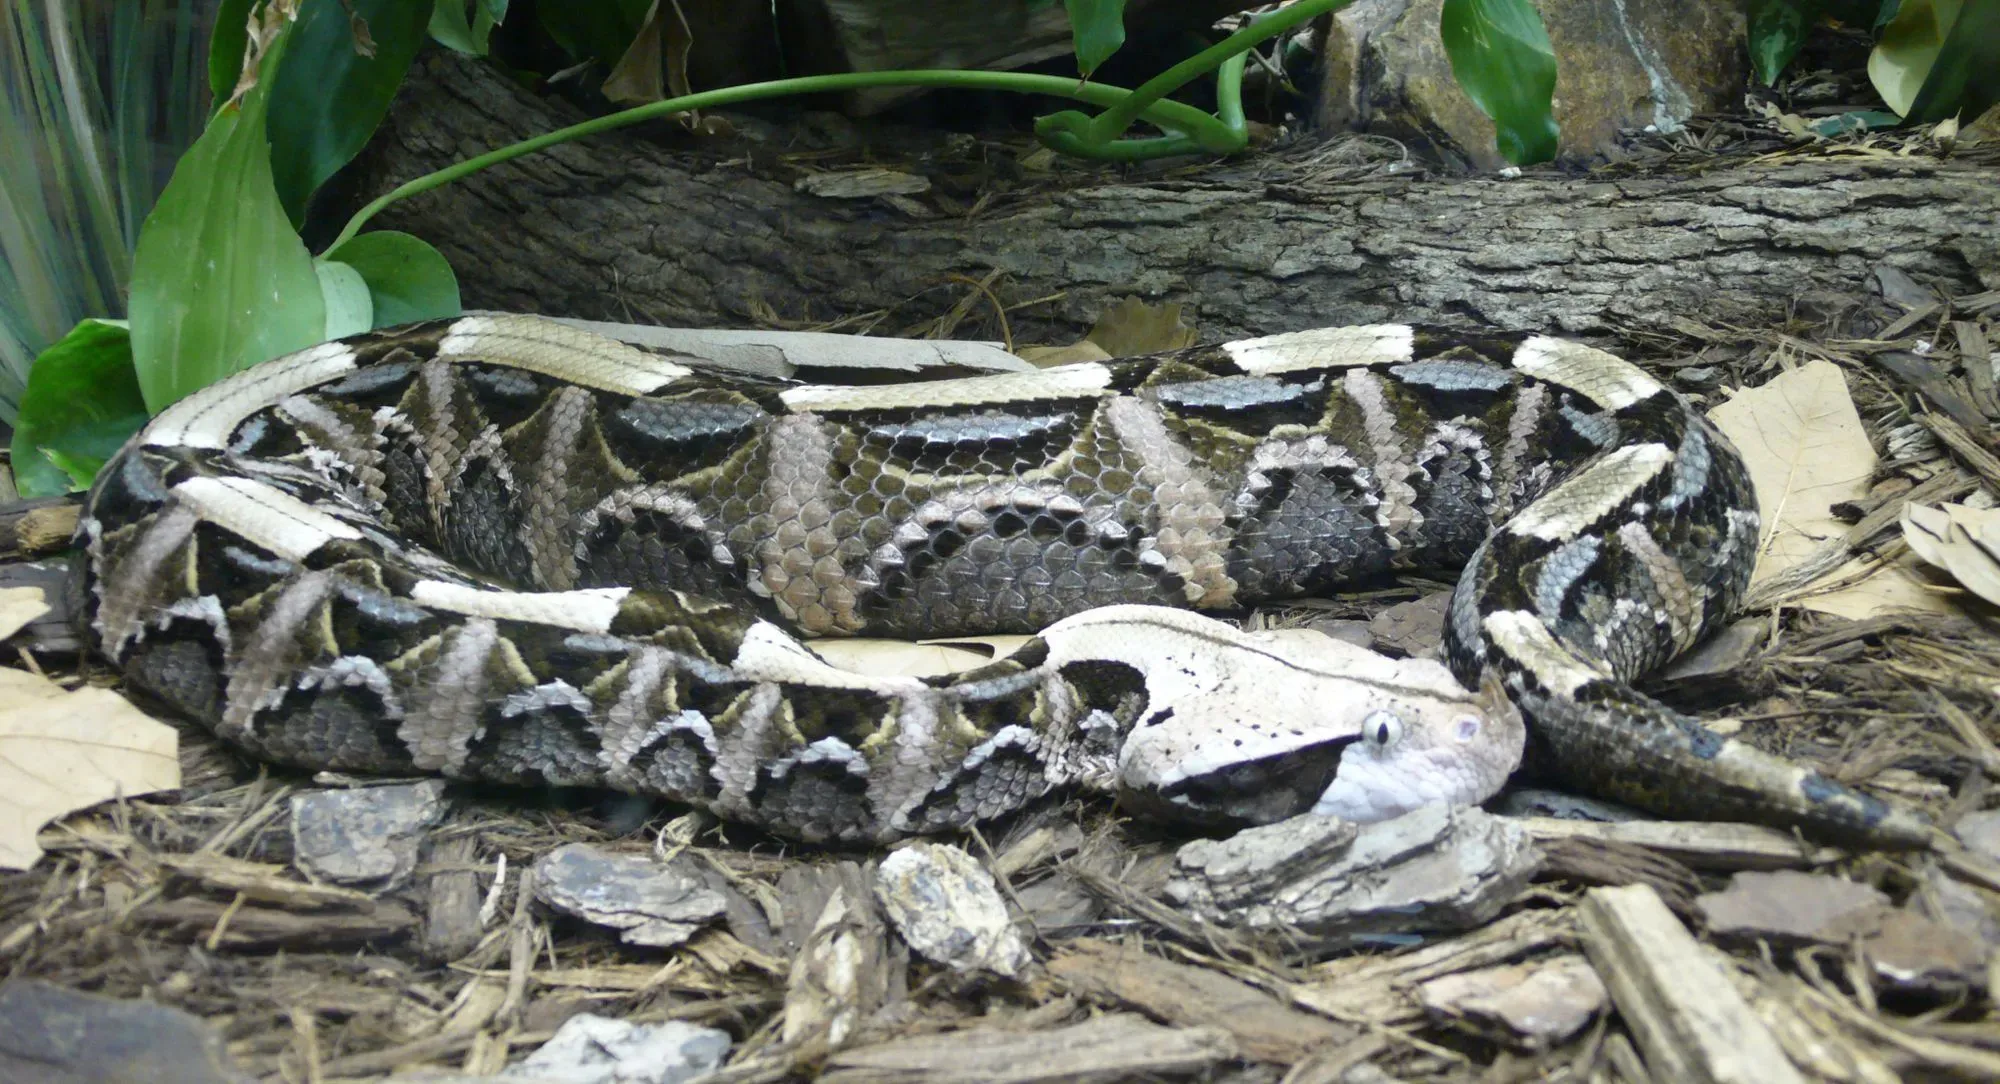 The scales of the horned sea snakes are rough and overlapping.